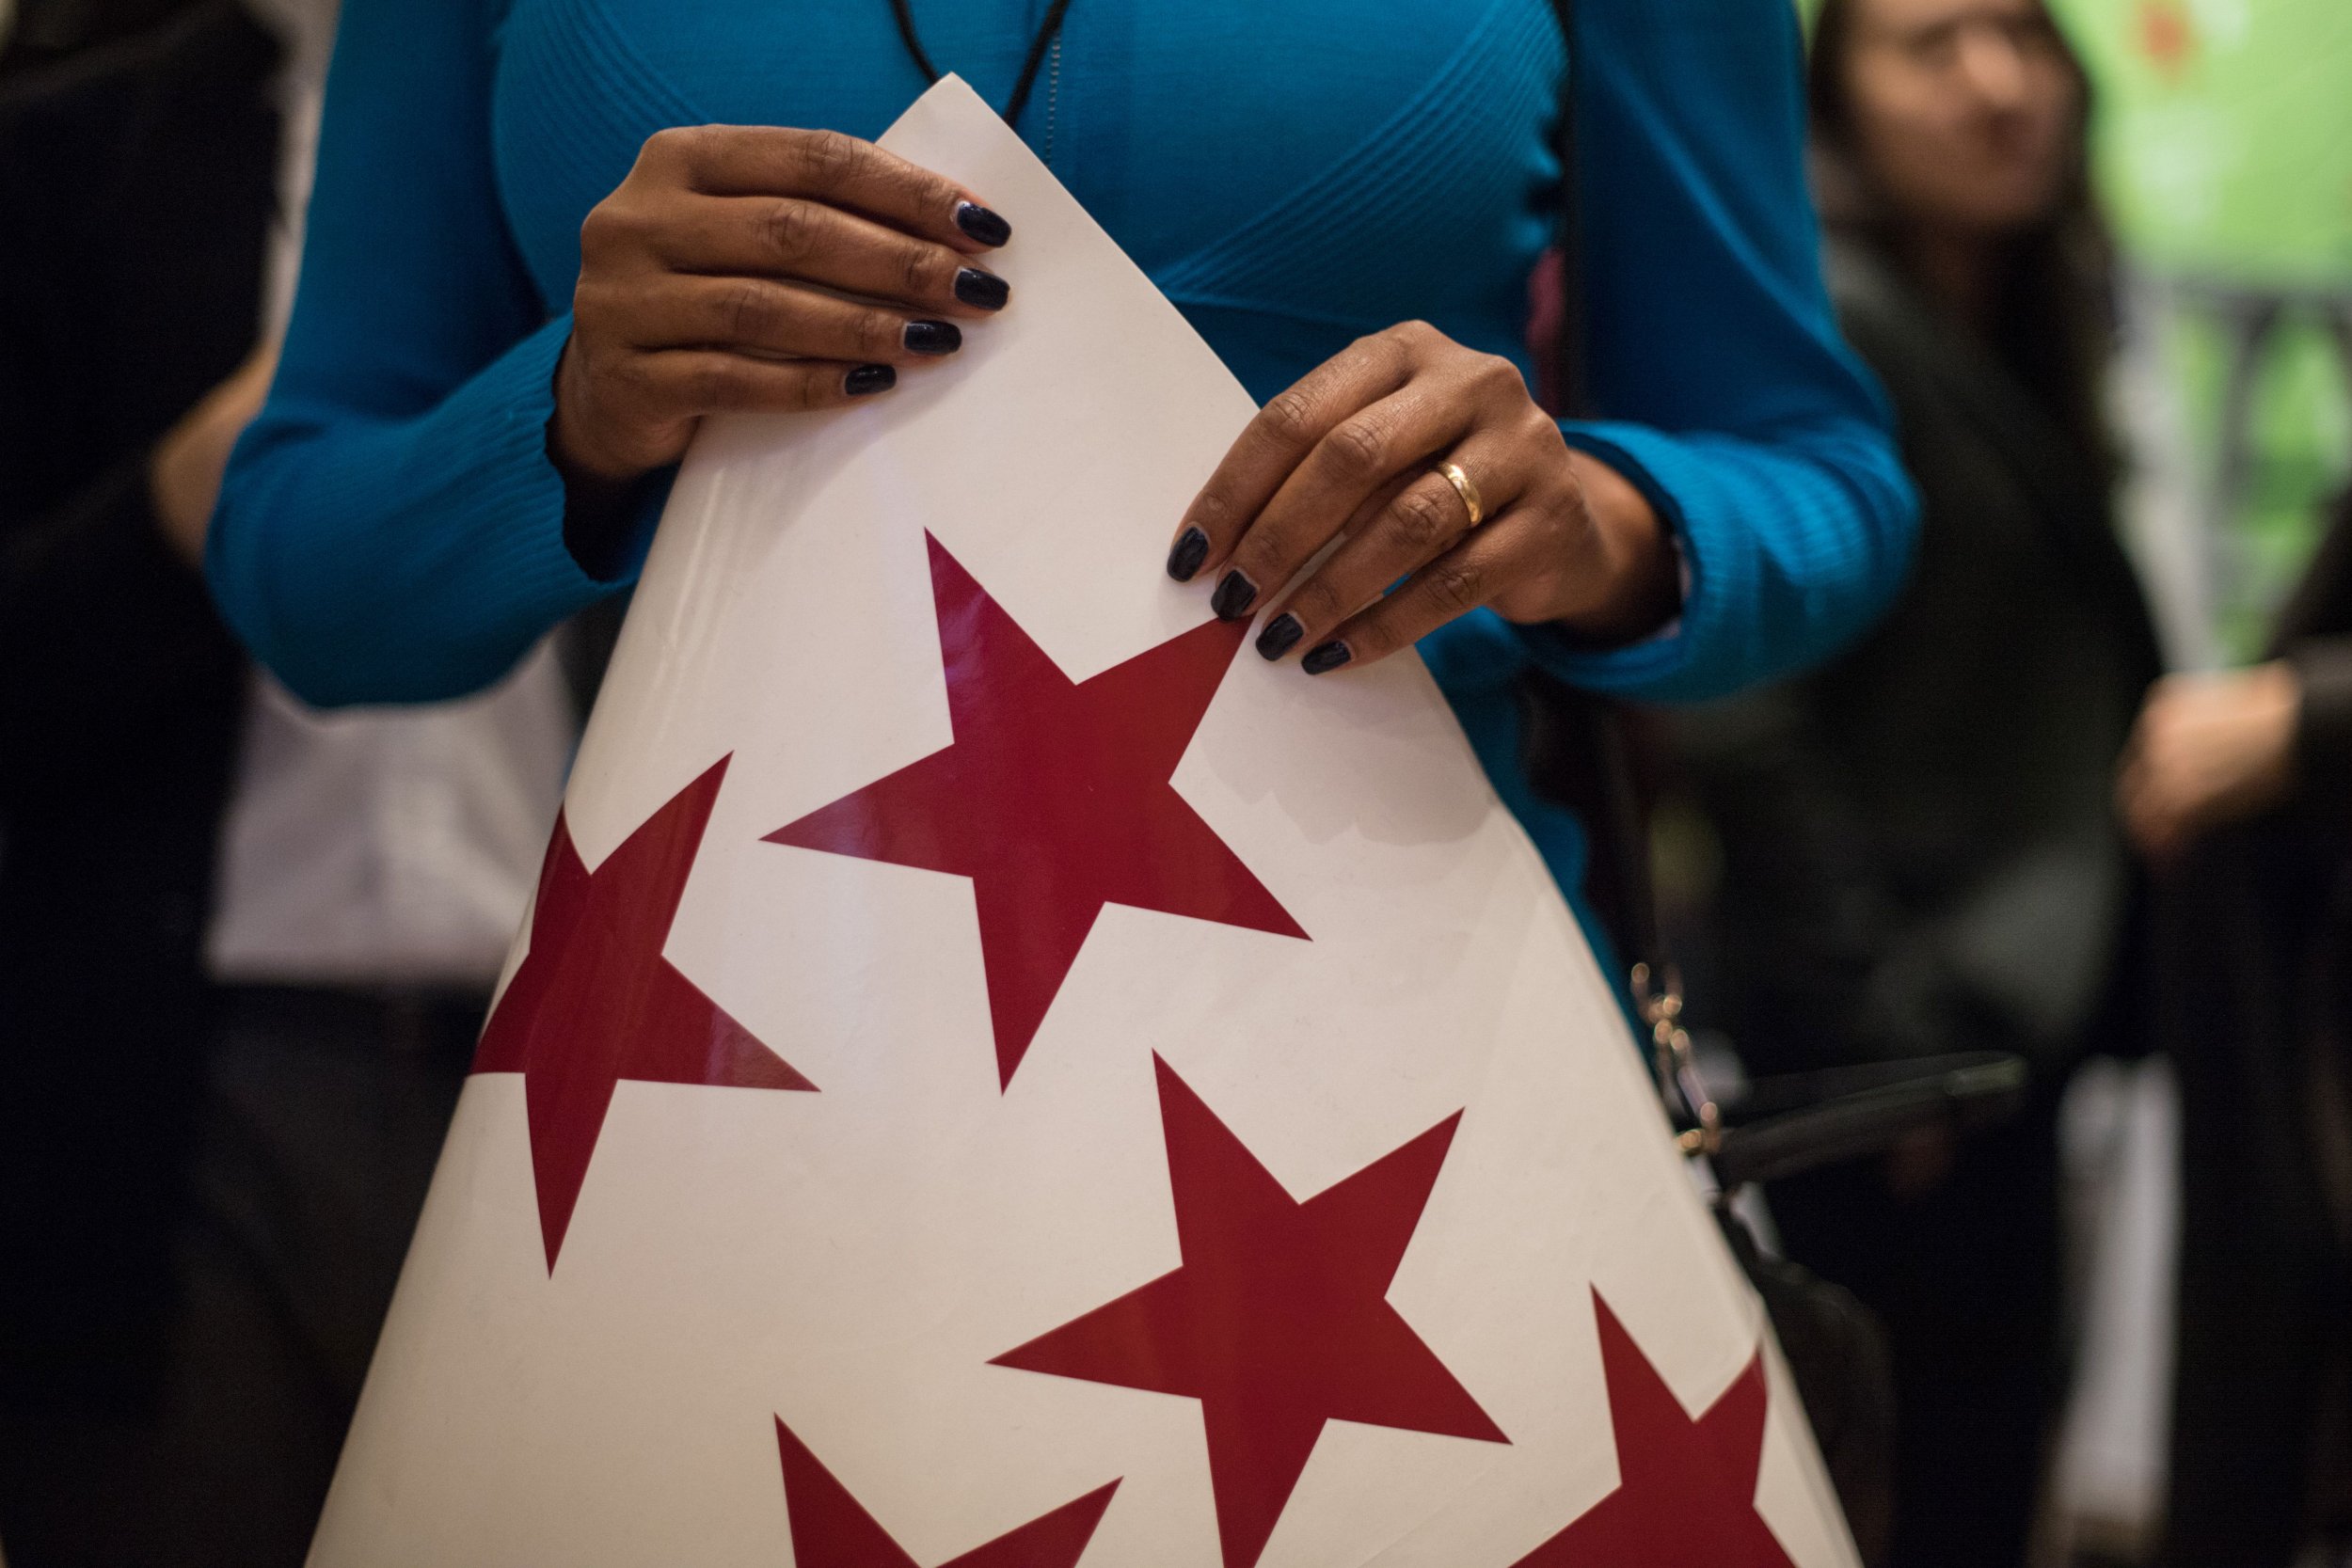 A woman holds a sheet of sticky red stars